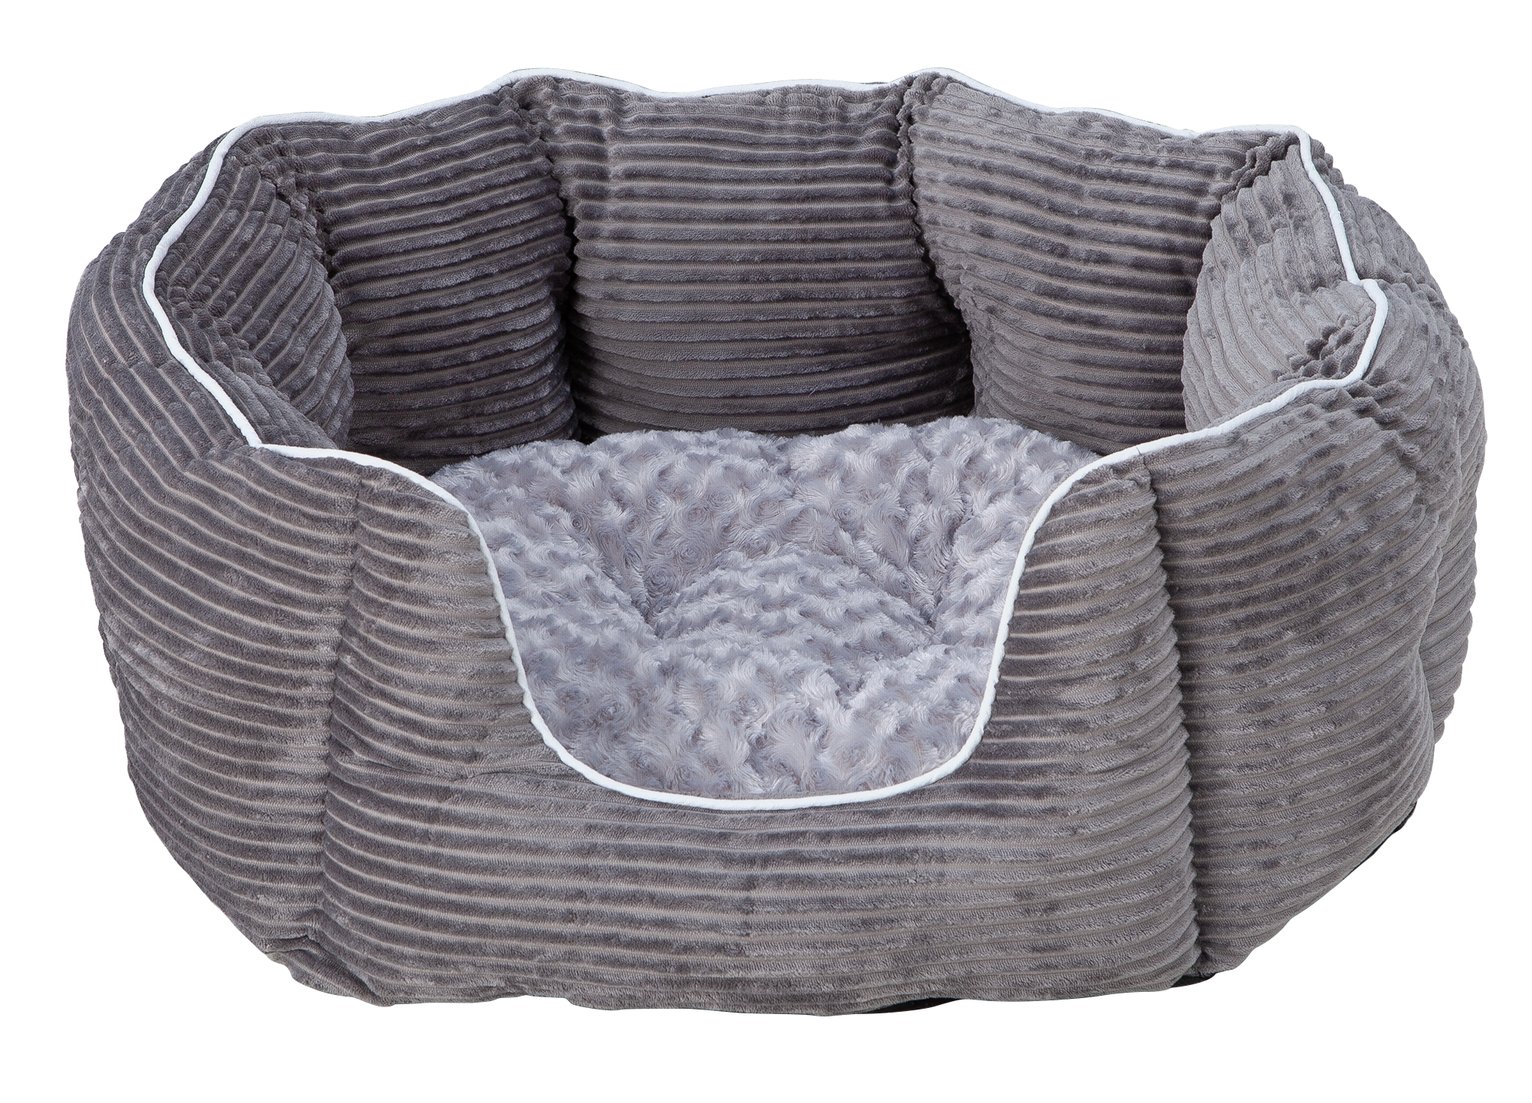 Grey Cord Oval Pet Bed - Large